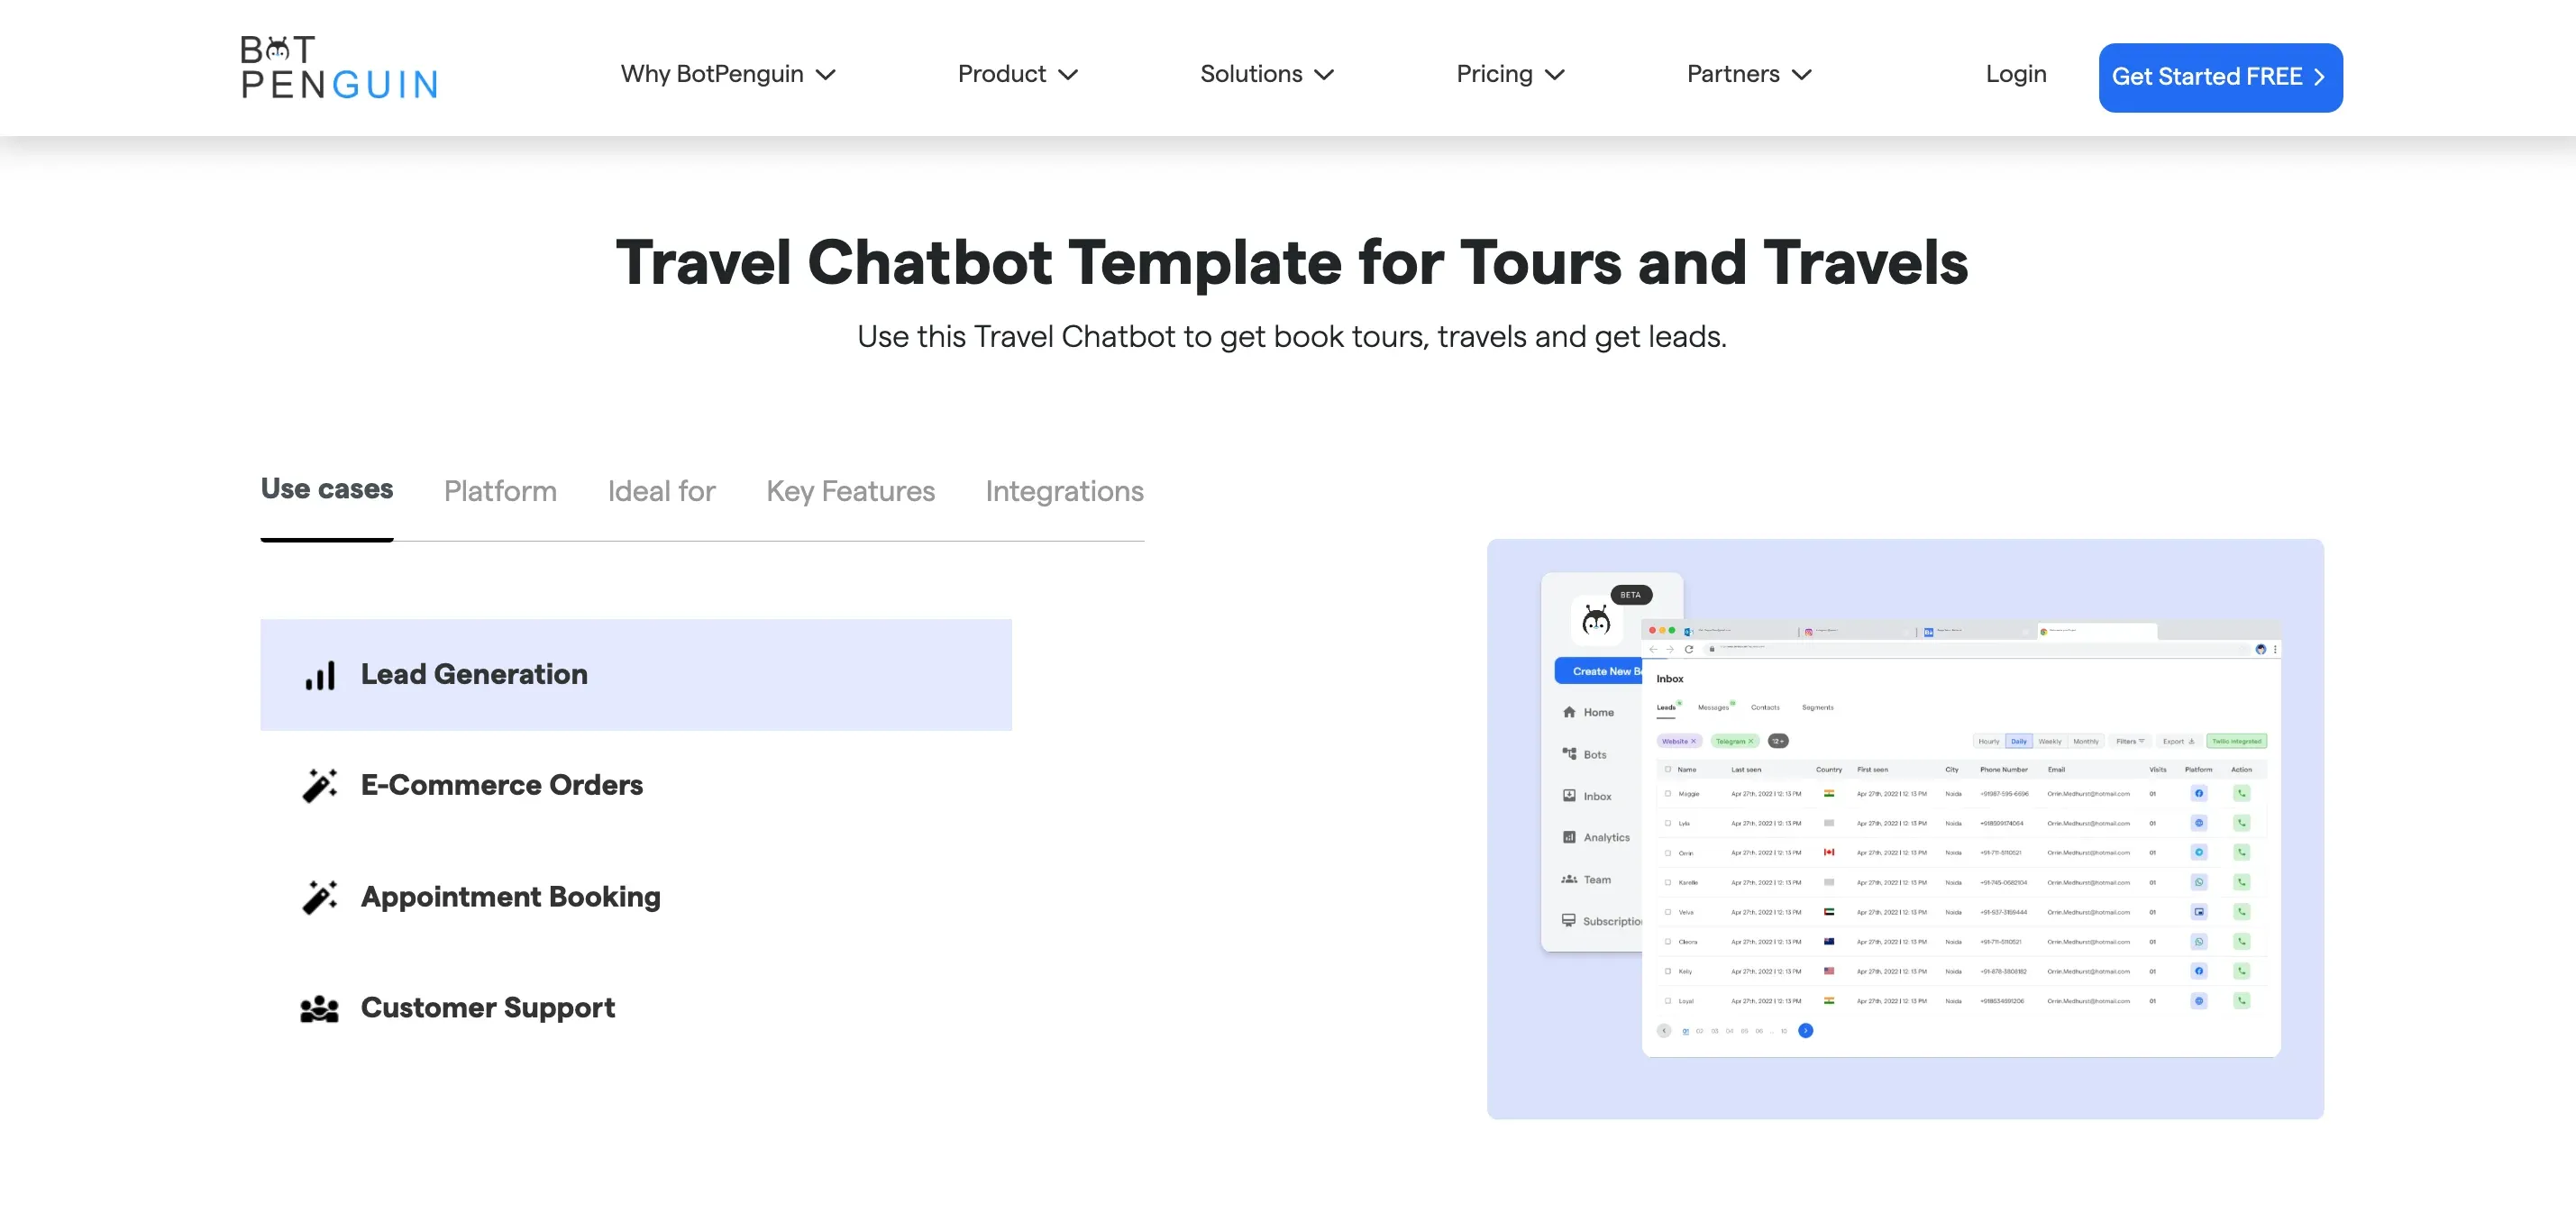 Why Choose BotPenguin for Creating a Travel Chatbot?